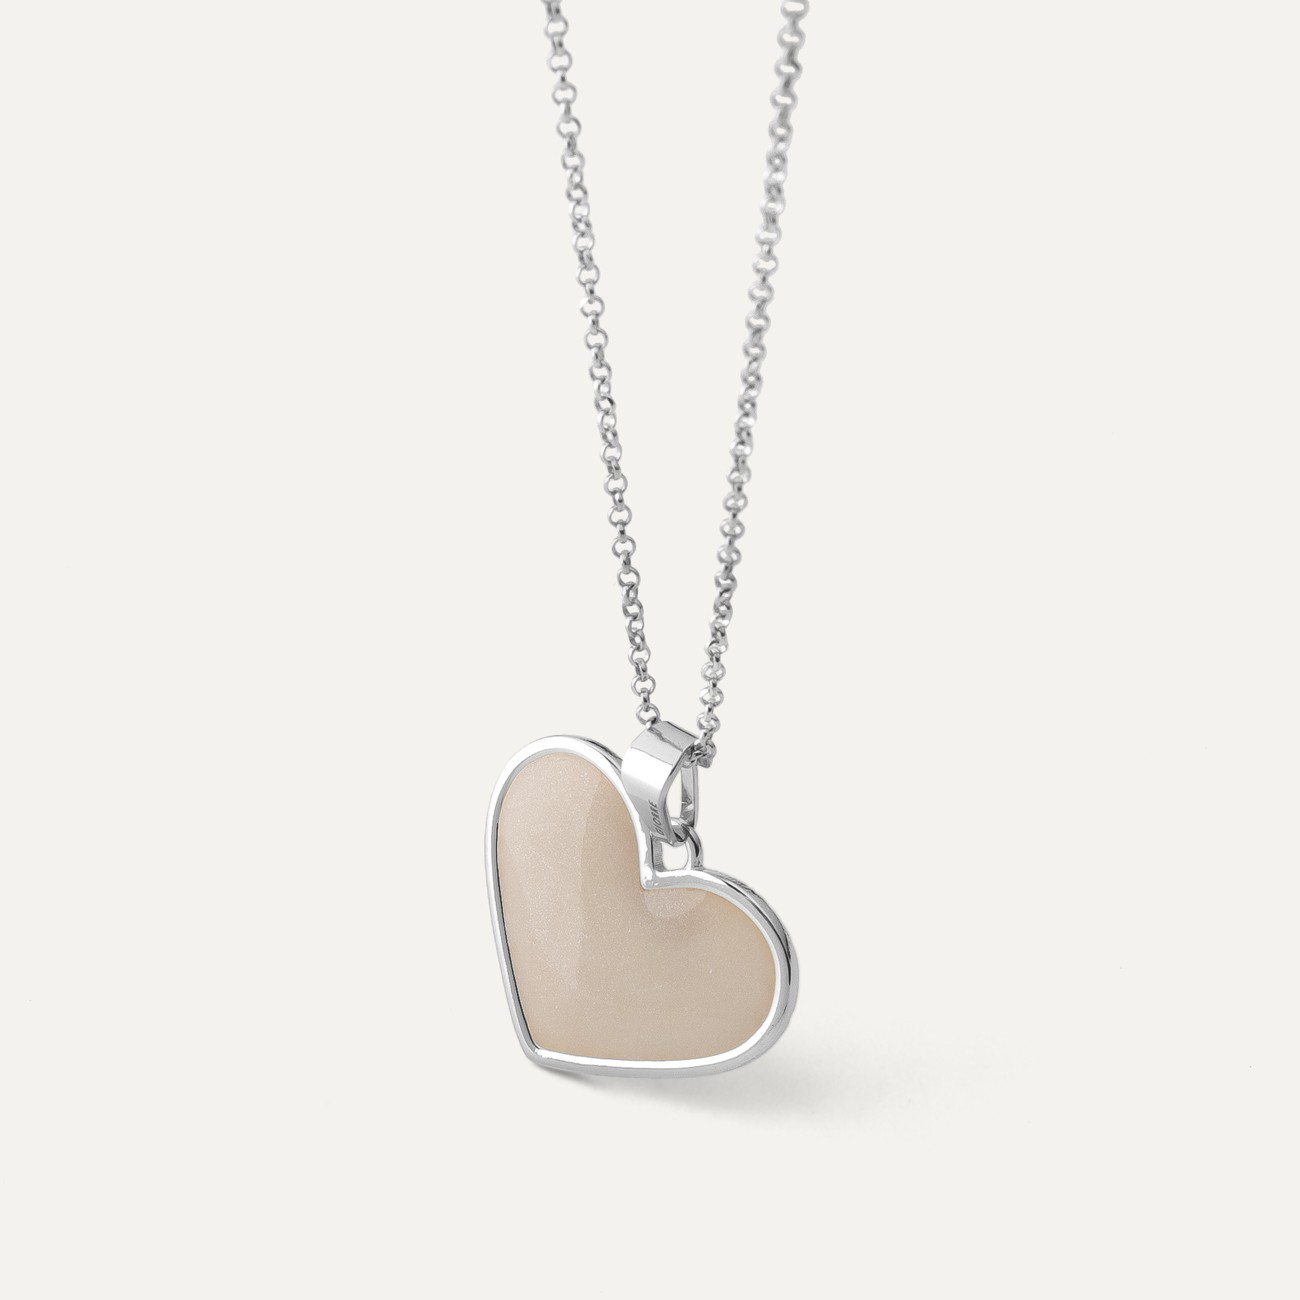 White resin heart necklace, sterling silver 925